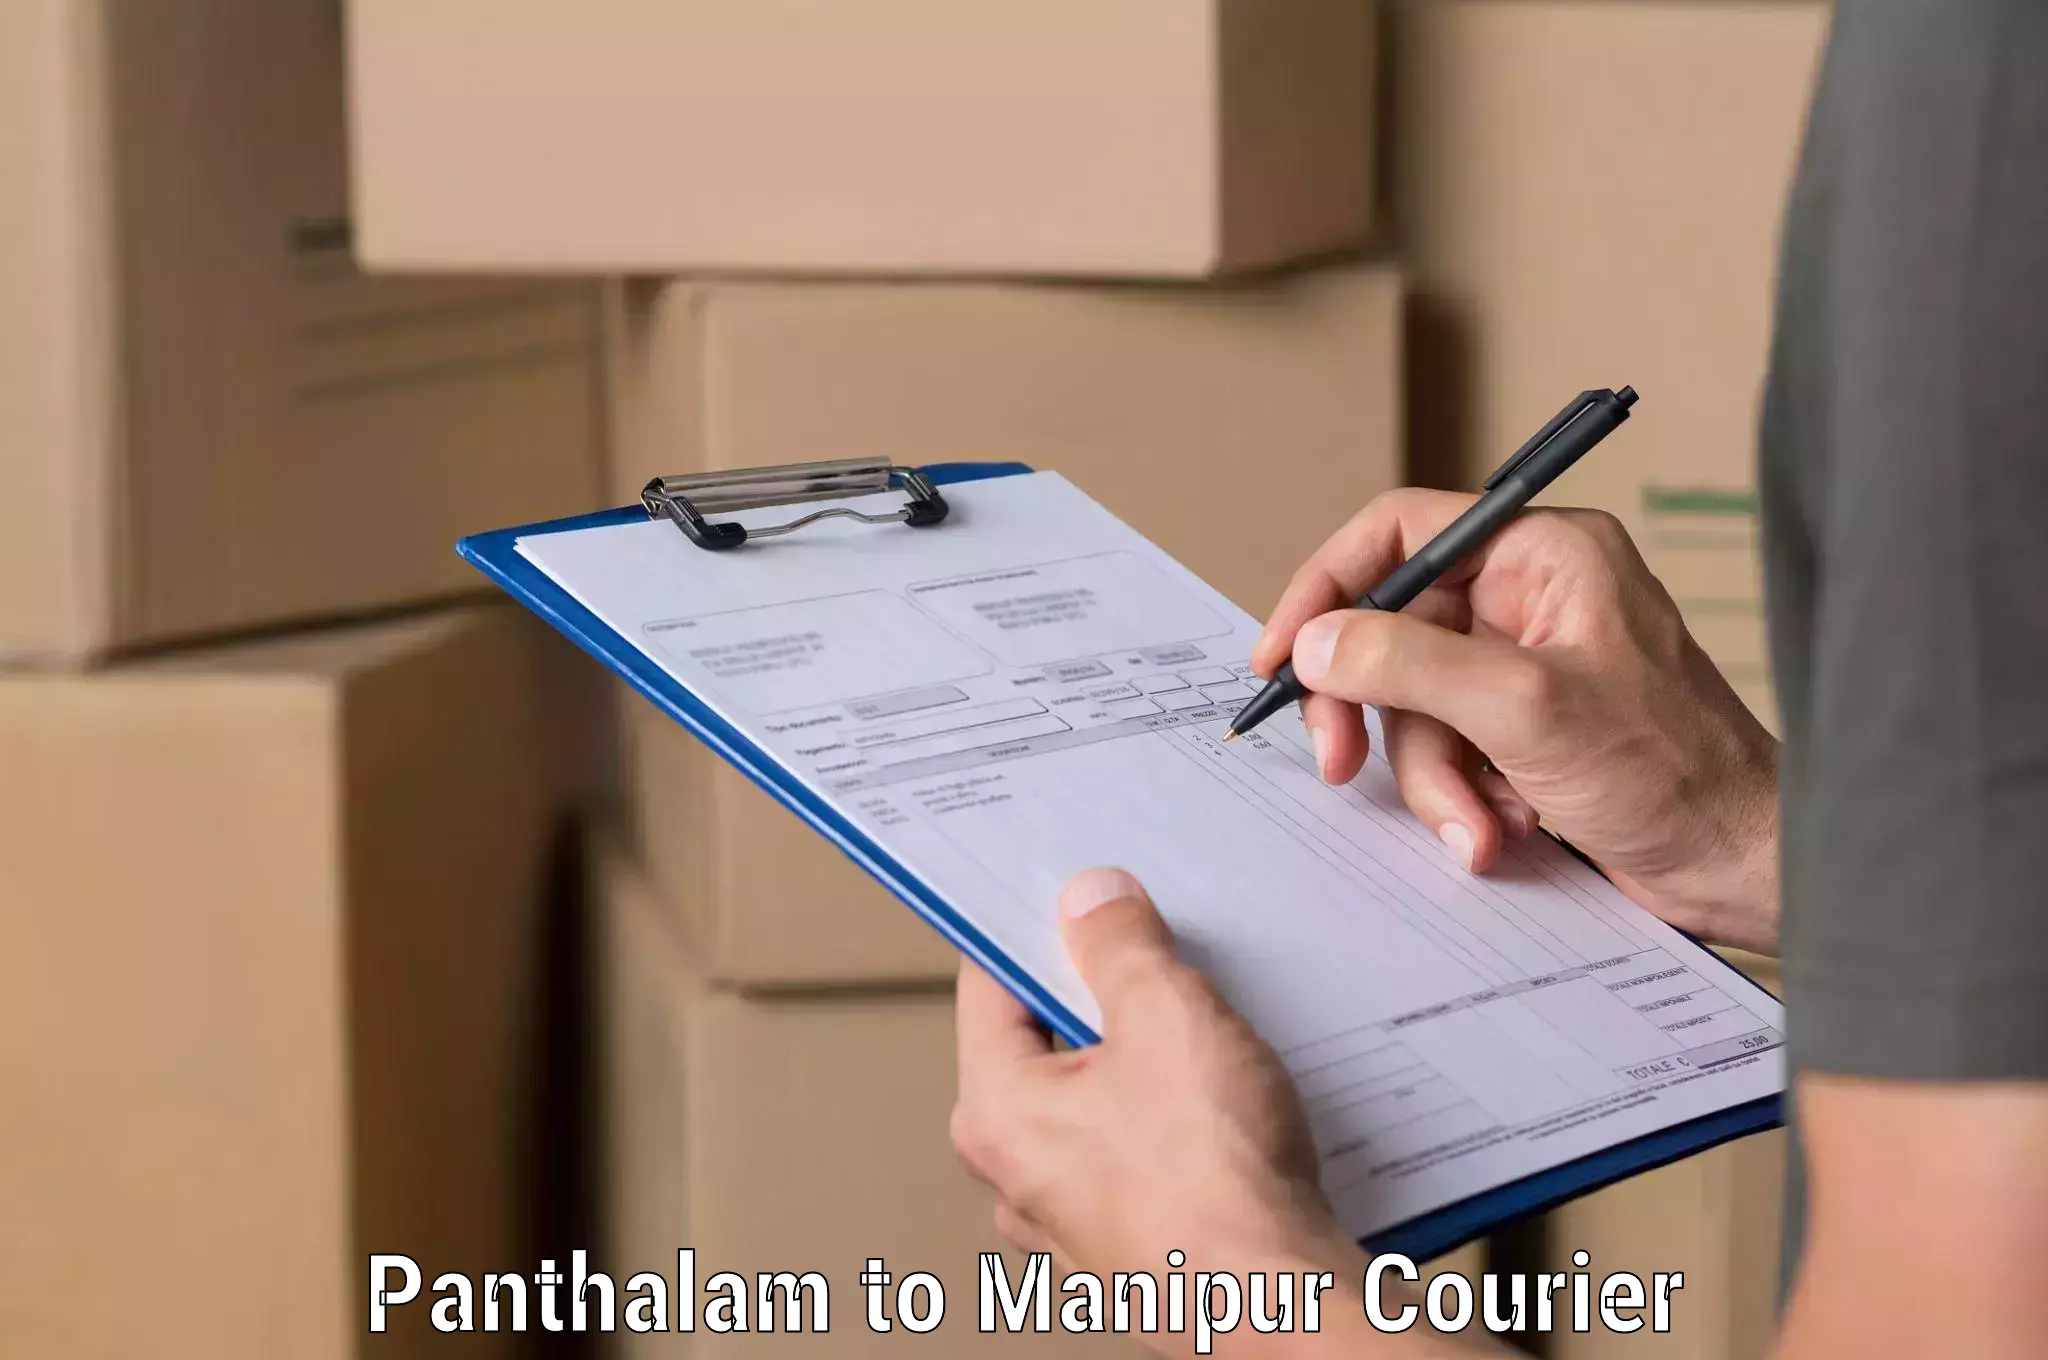 Modern courier technology Panthalam to Ukhrul